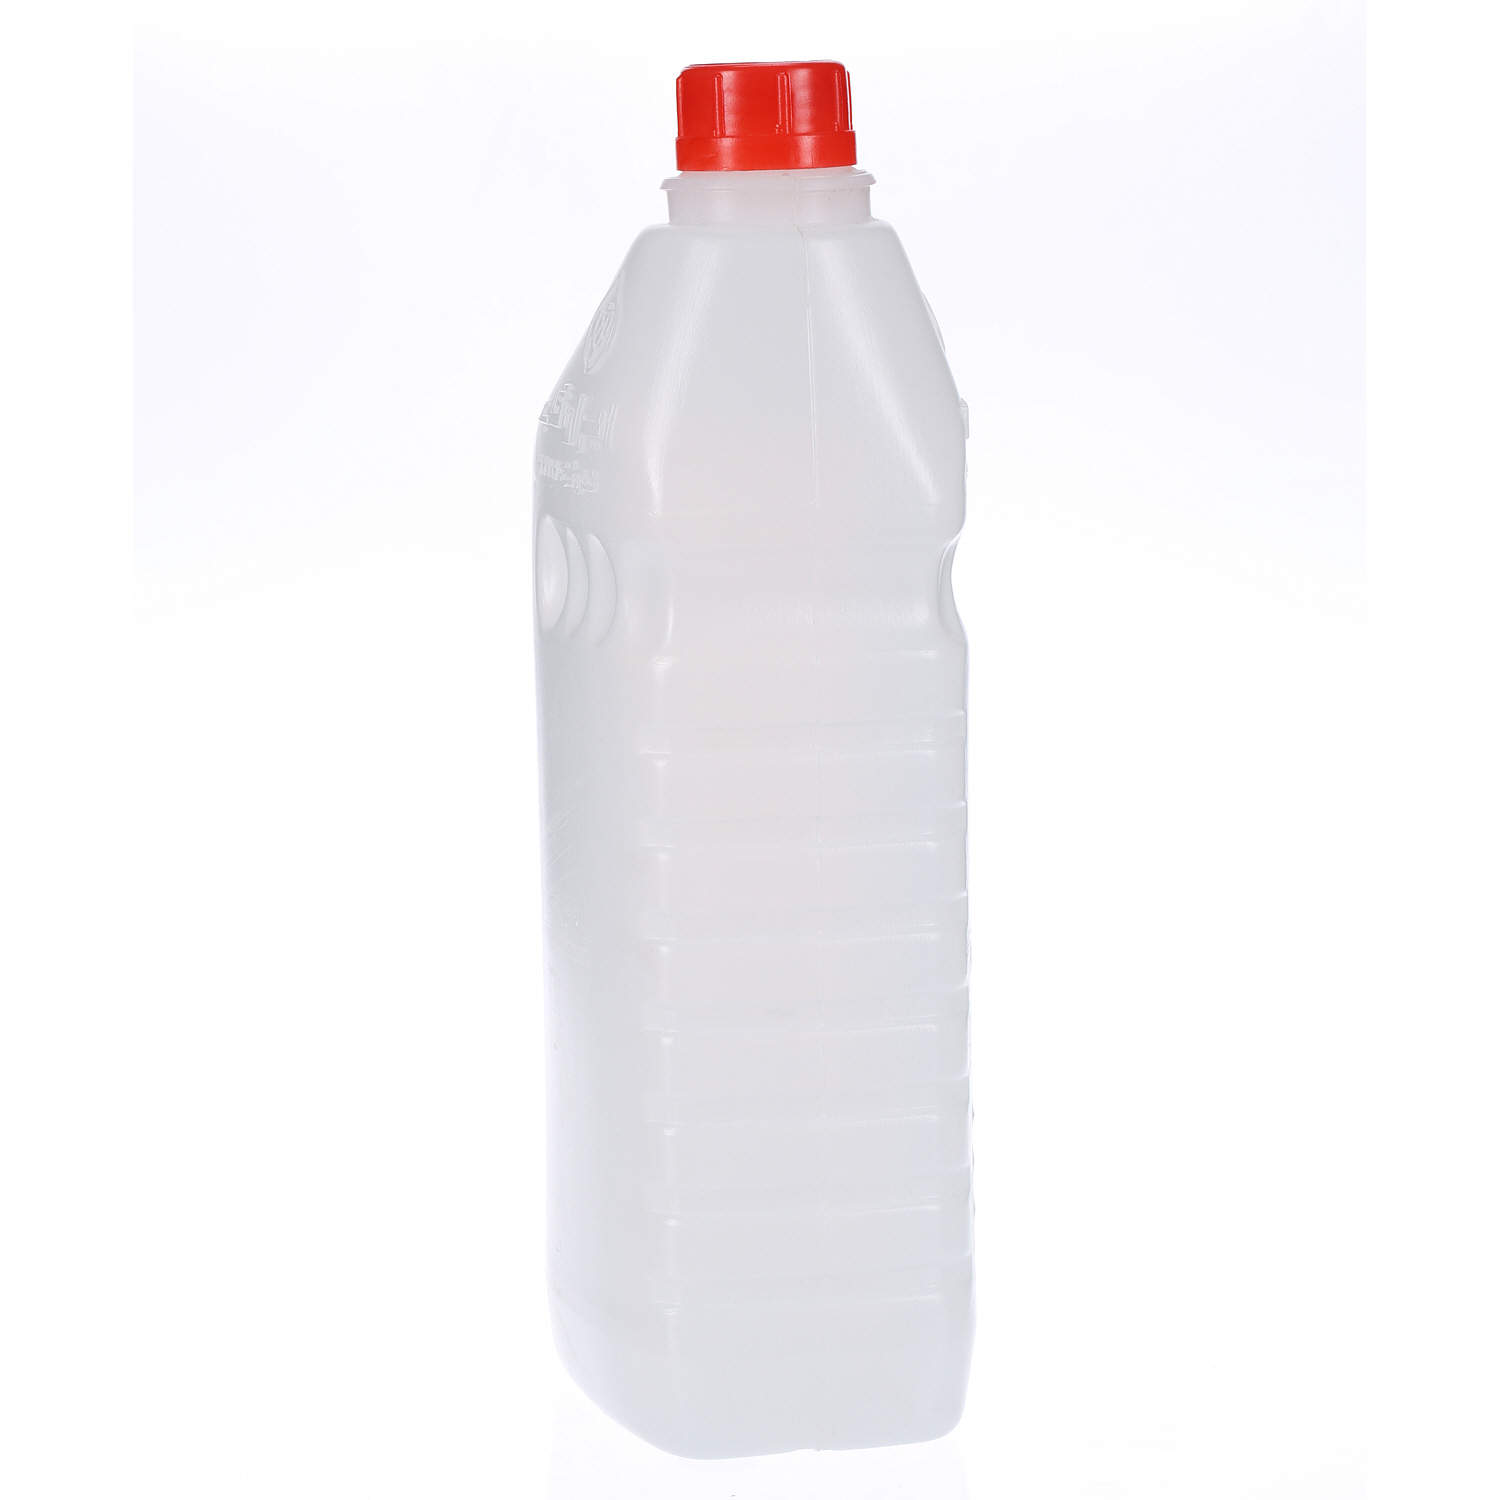 Rabee Rose Water 2Ltr